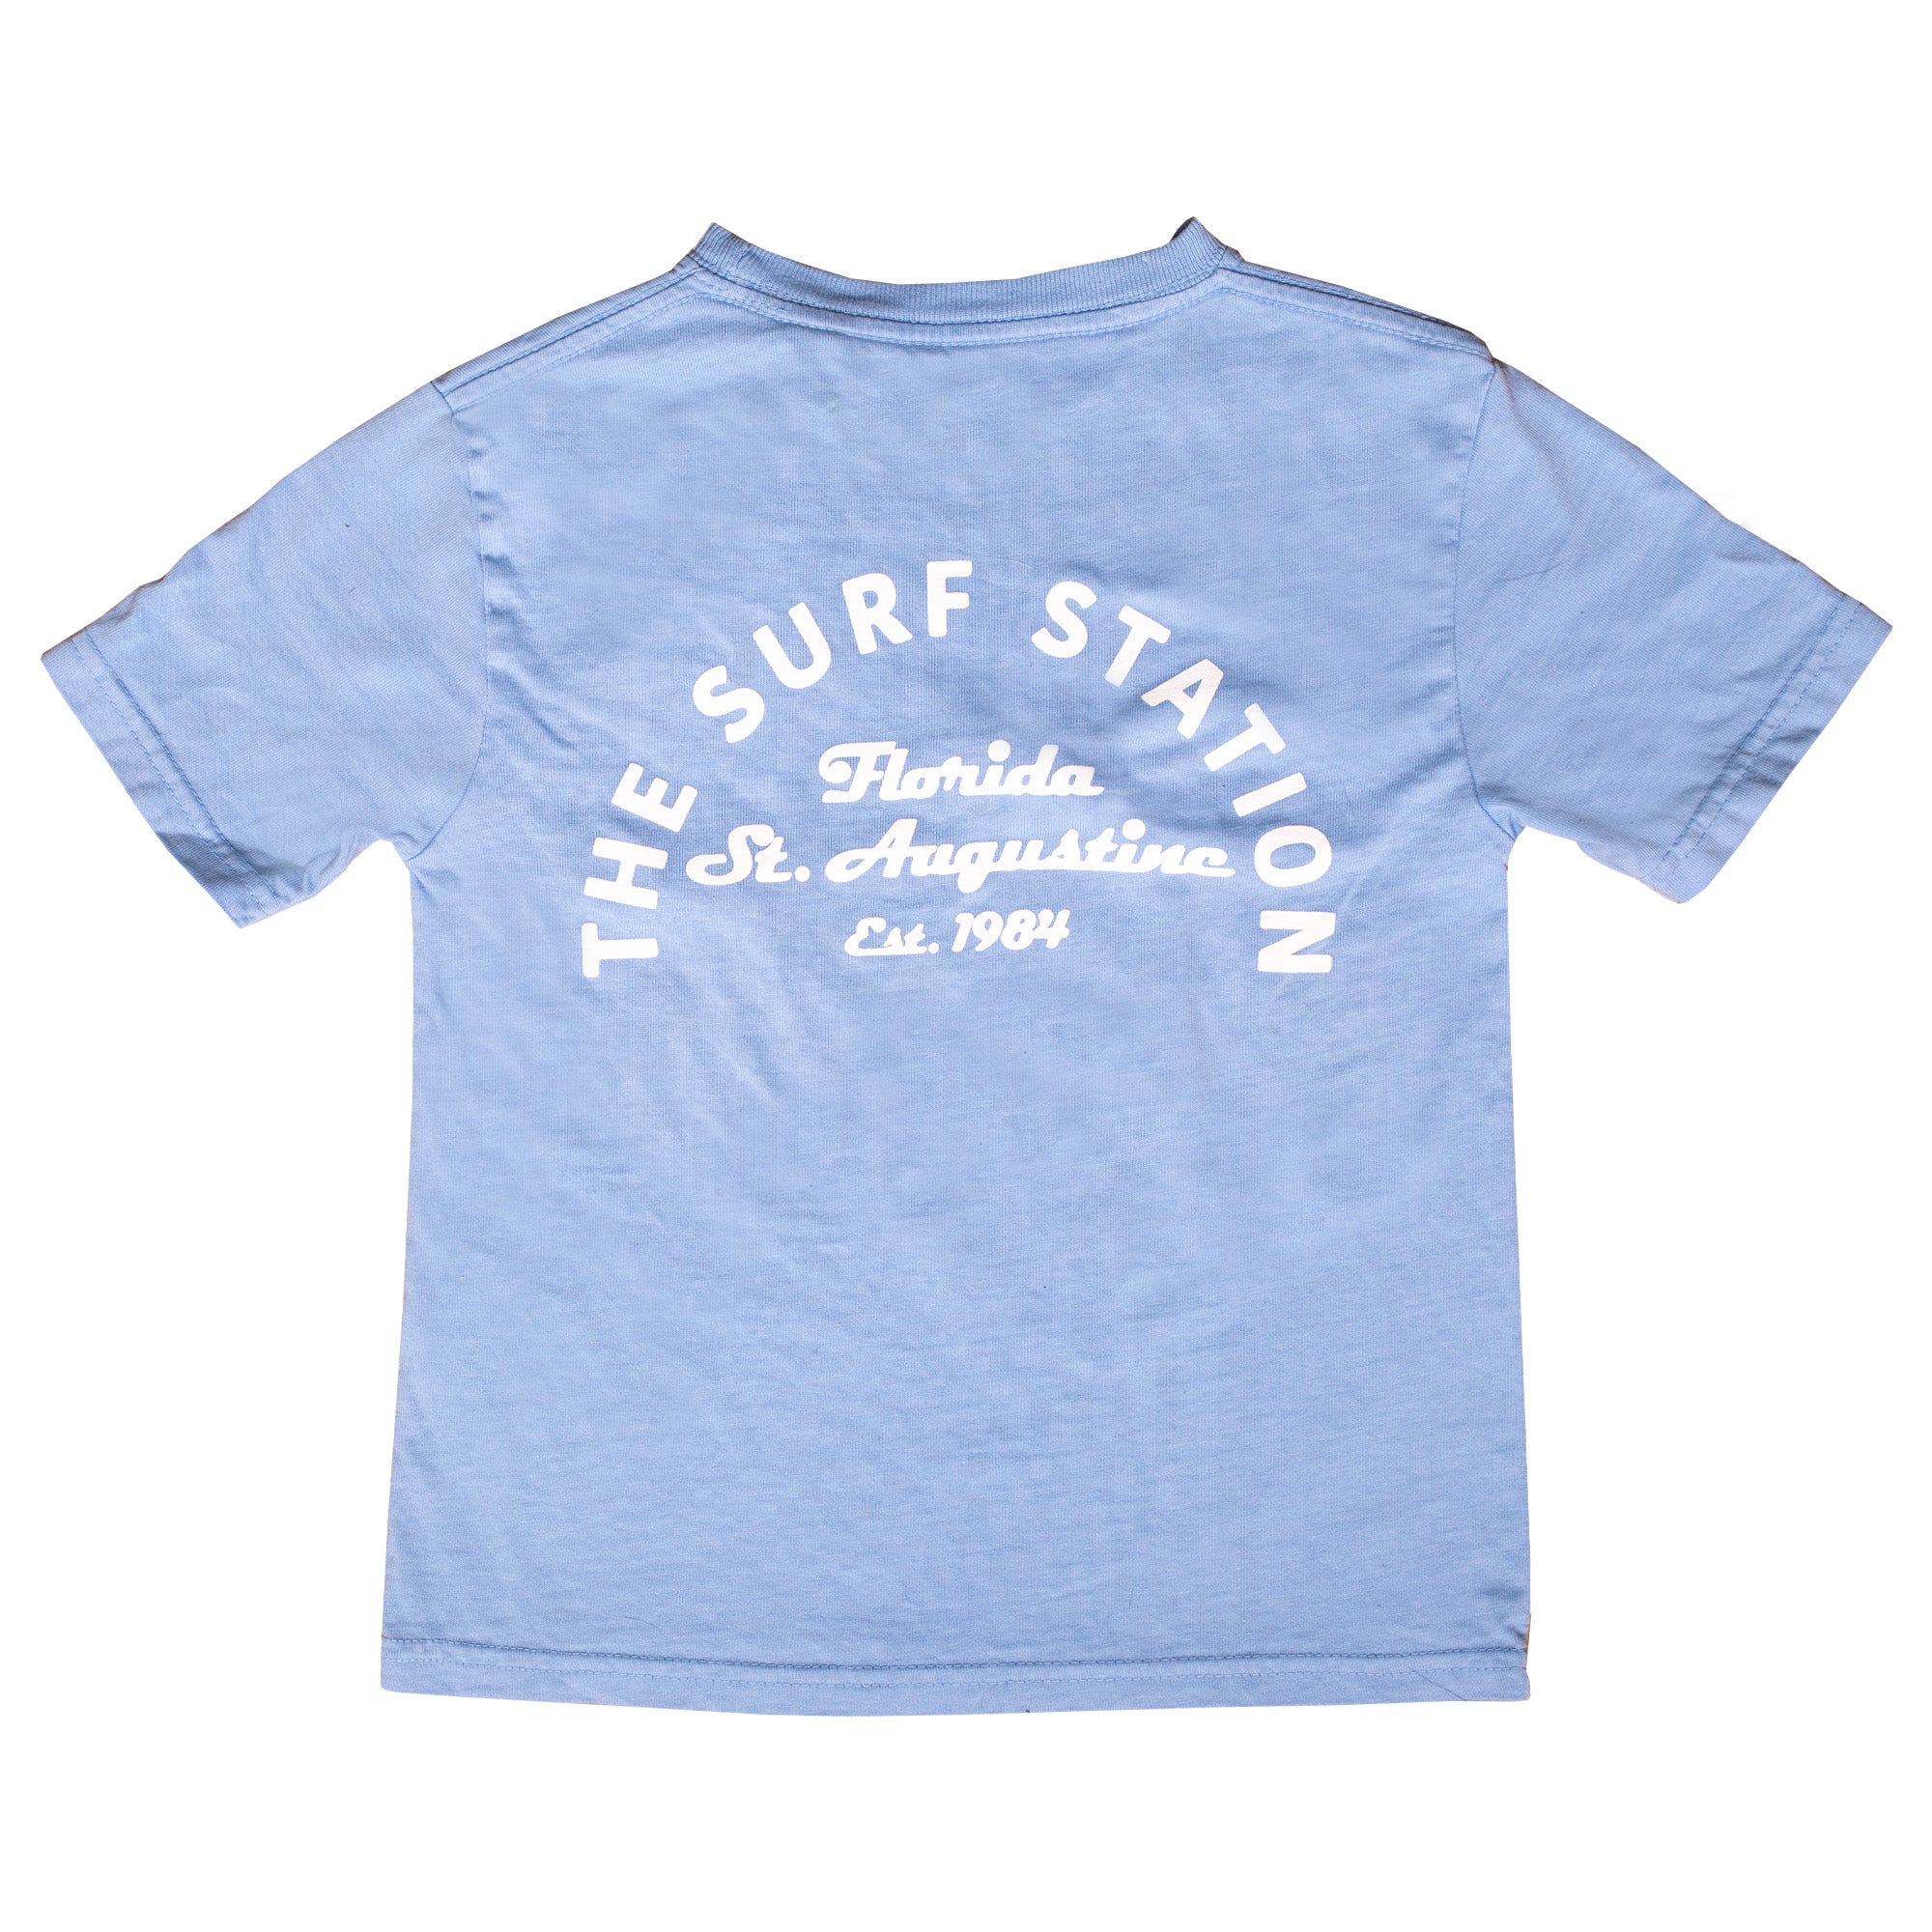 Surf Station Arch Logo 2.0 Youth Boy's S/S T-Shirt